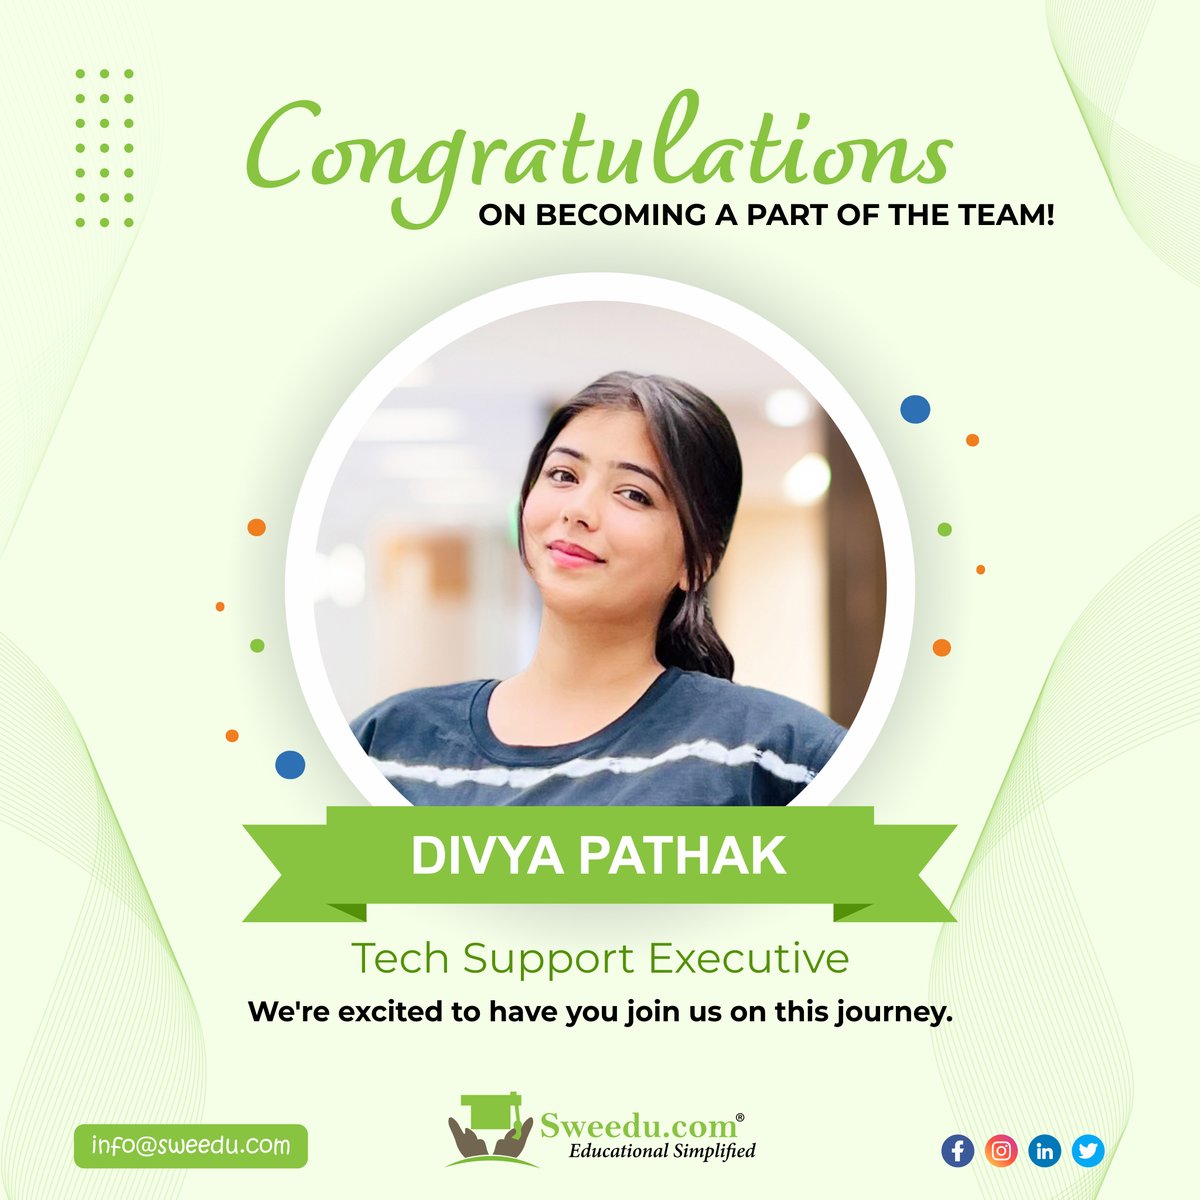 Exciting news! Divya Pathak is now part of Sweedu. With her knowledge and experience, we look forward to great things ahead. Welcome, Divya Pathak.

#sweedu